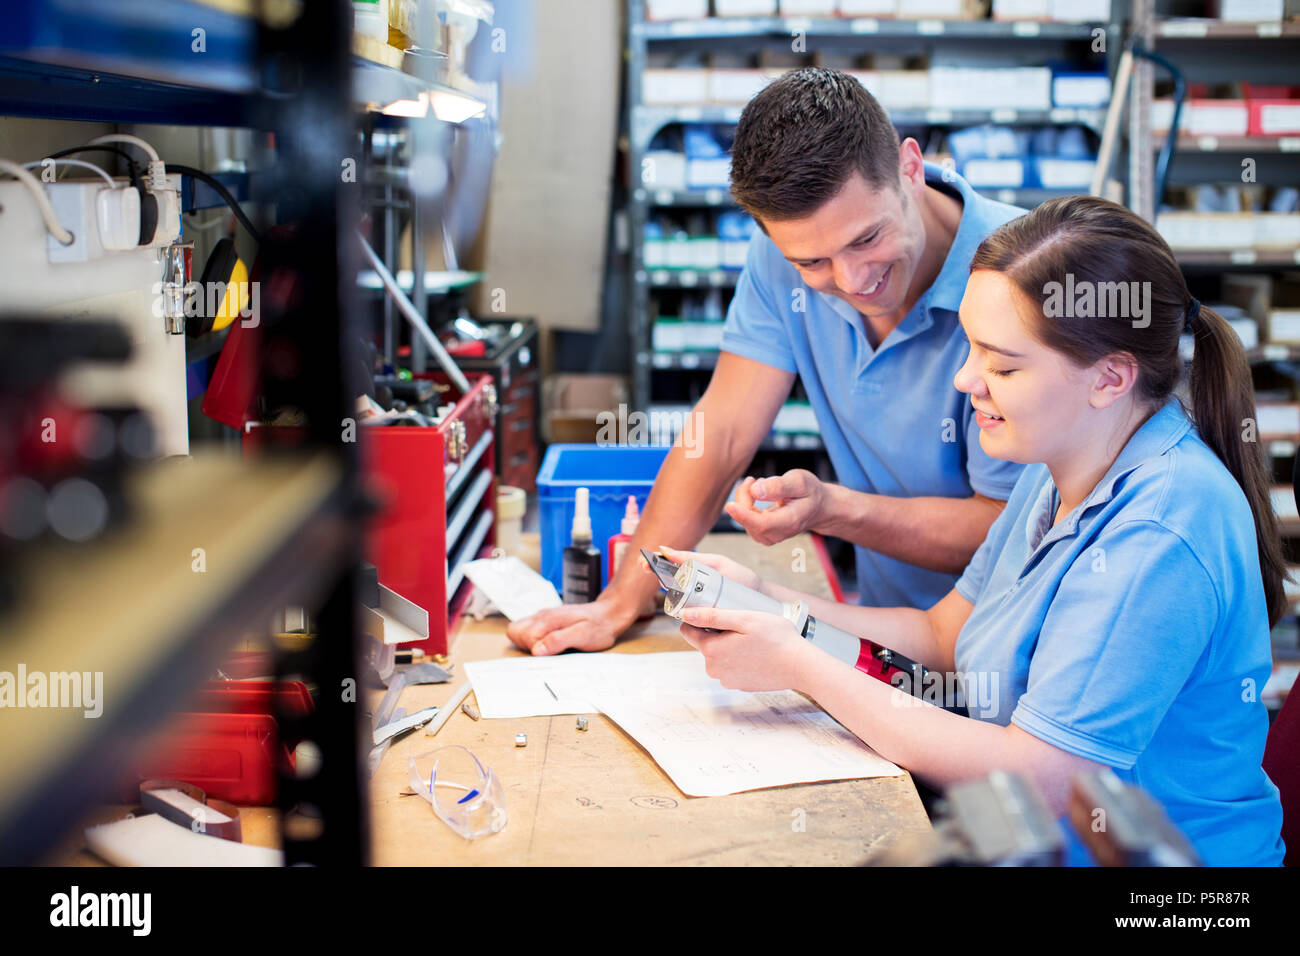 Engineer And Apprentice Examining Component At Workbench Stock Photo